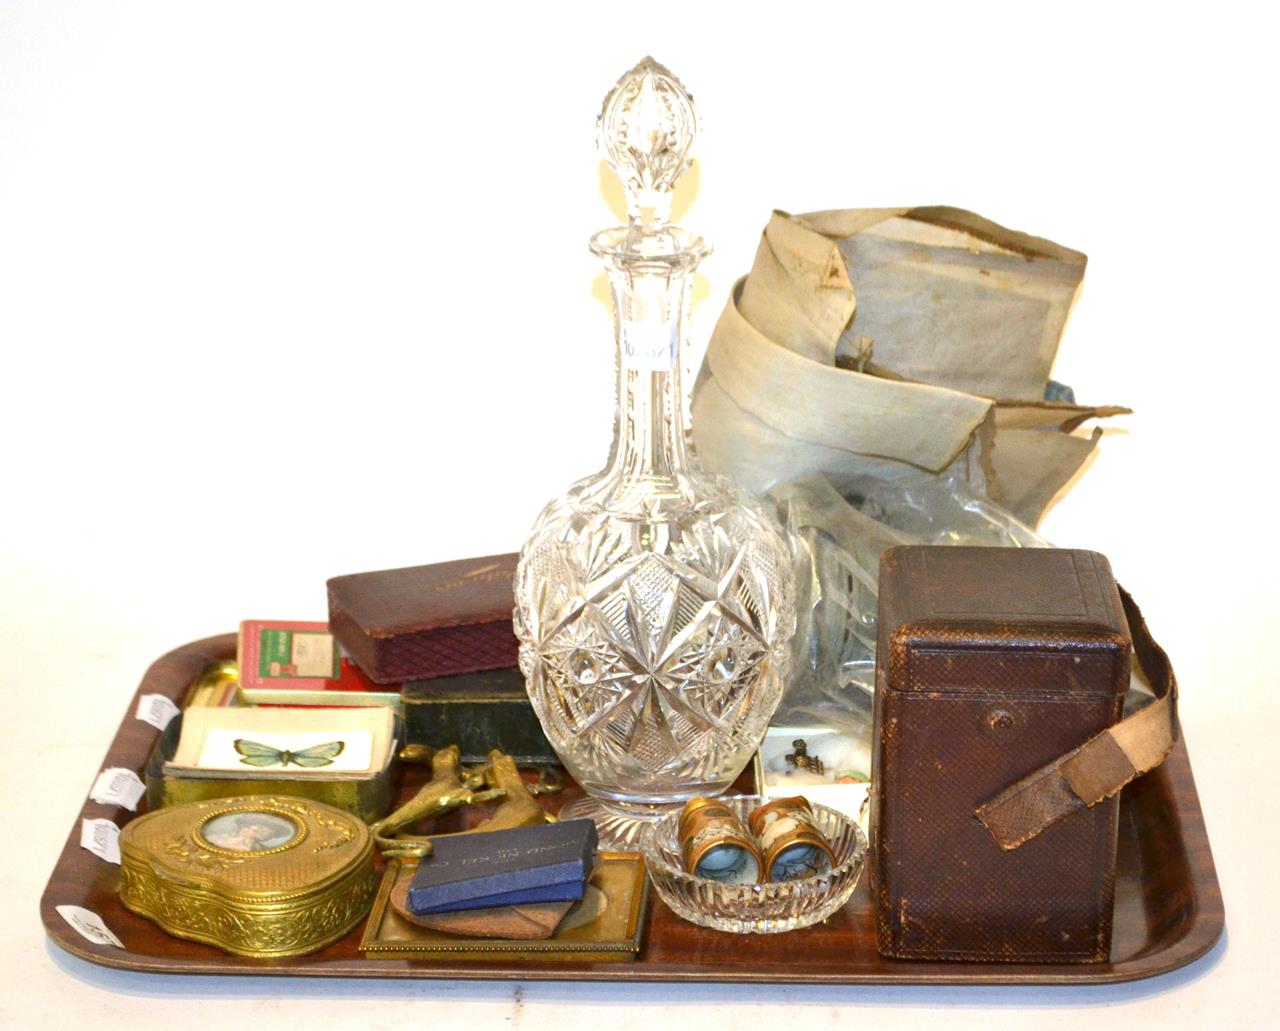 Lot 157 - Brass carriage clock, silk cigarette cards, playing cards, scales, decanter, etc